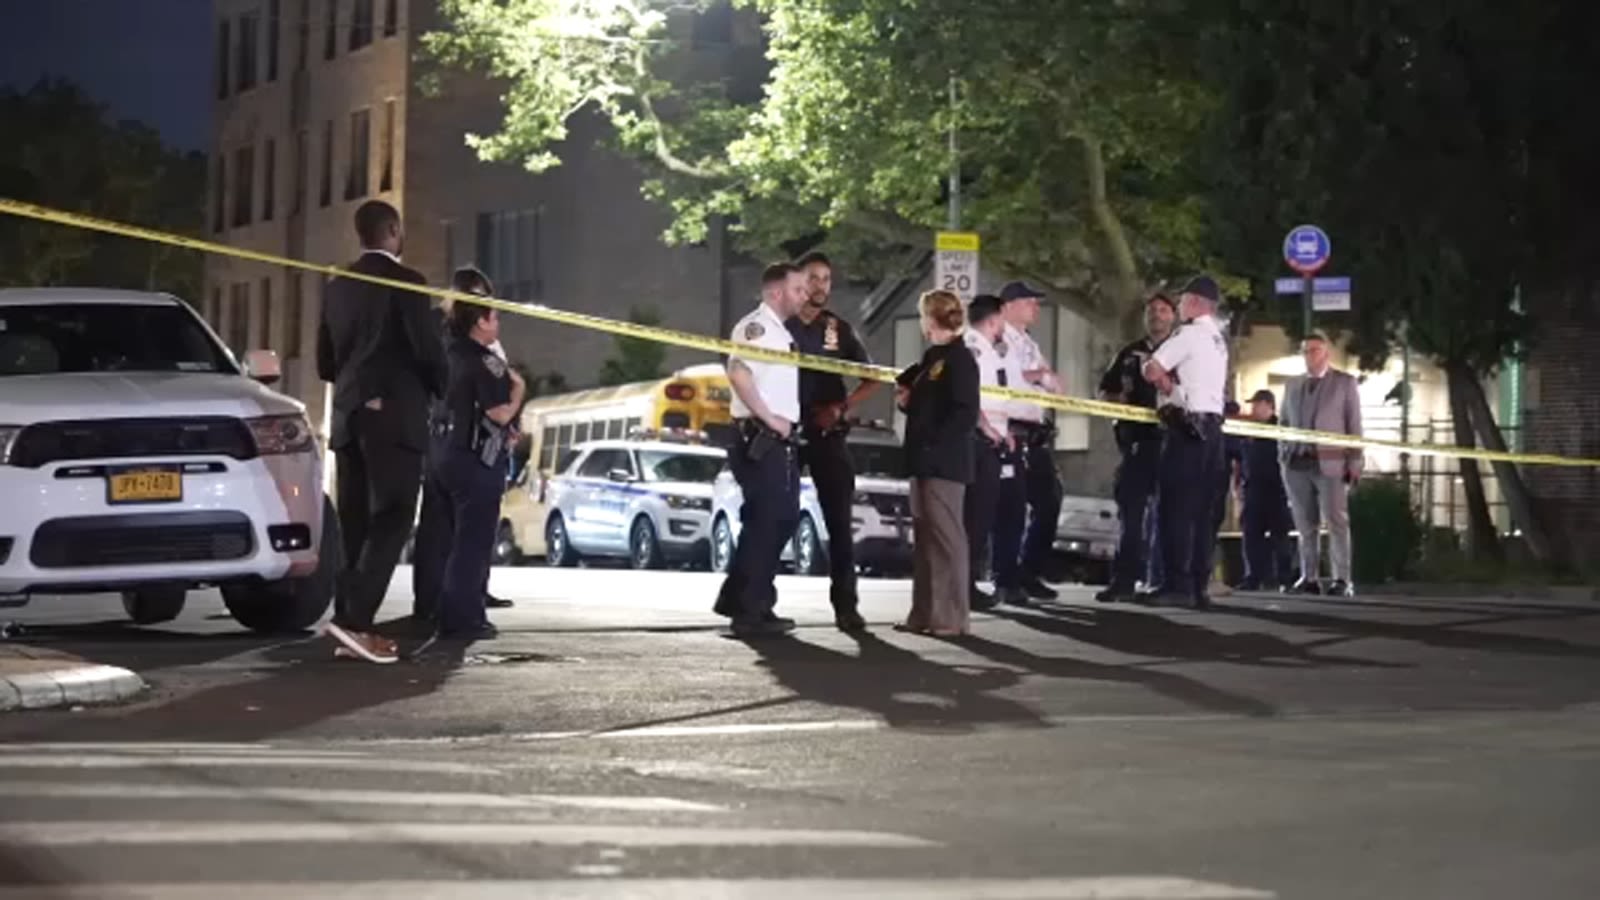 Officer injured by driver fleeing traffic stop in Brooklyn; shots fired, NYPD says